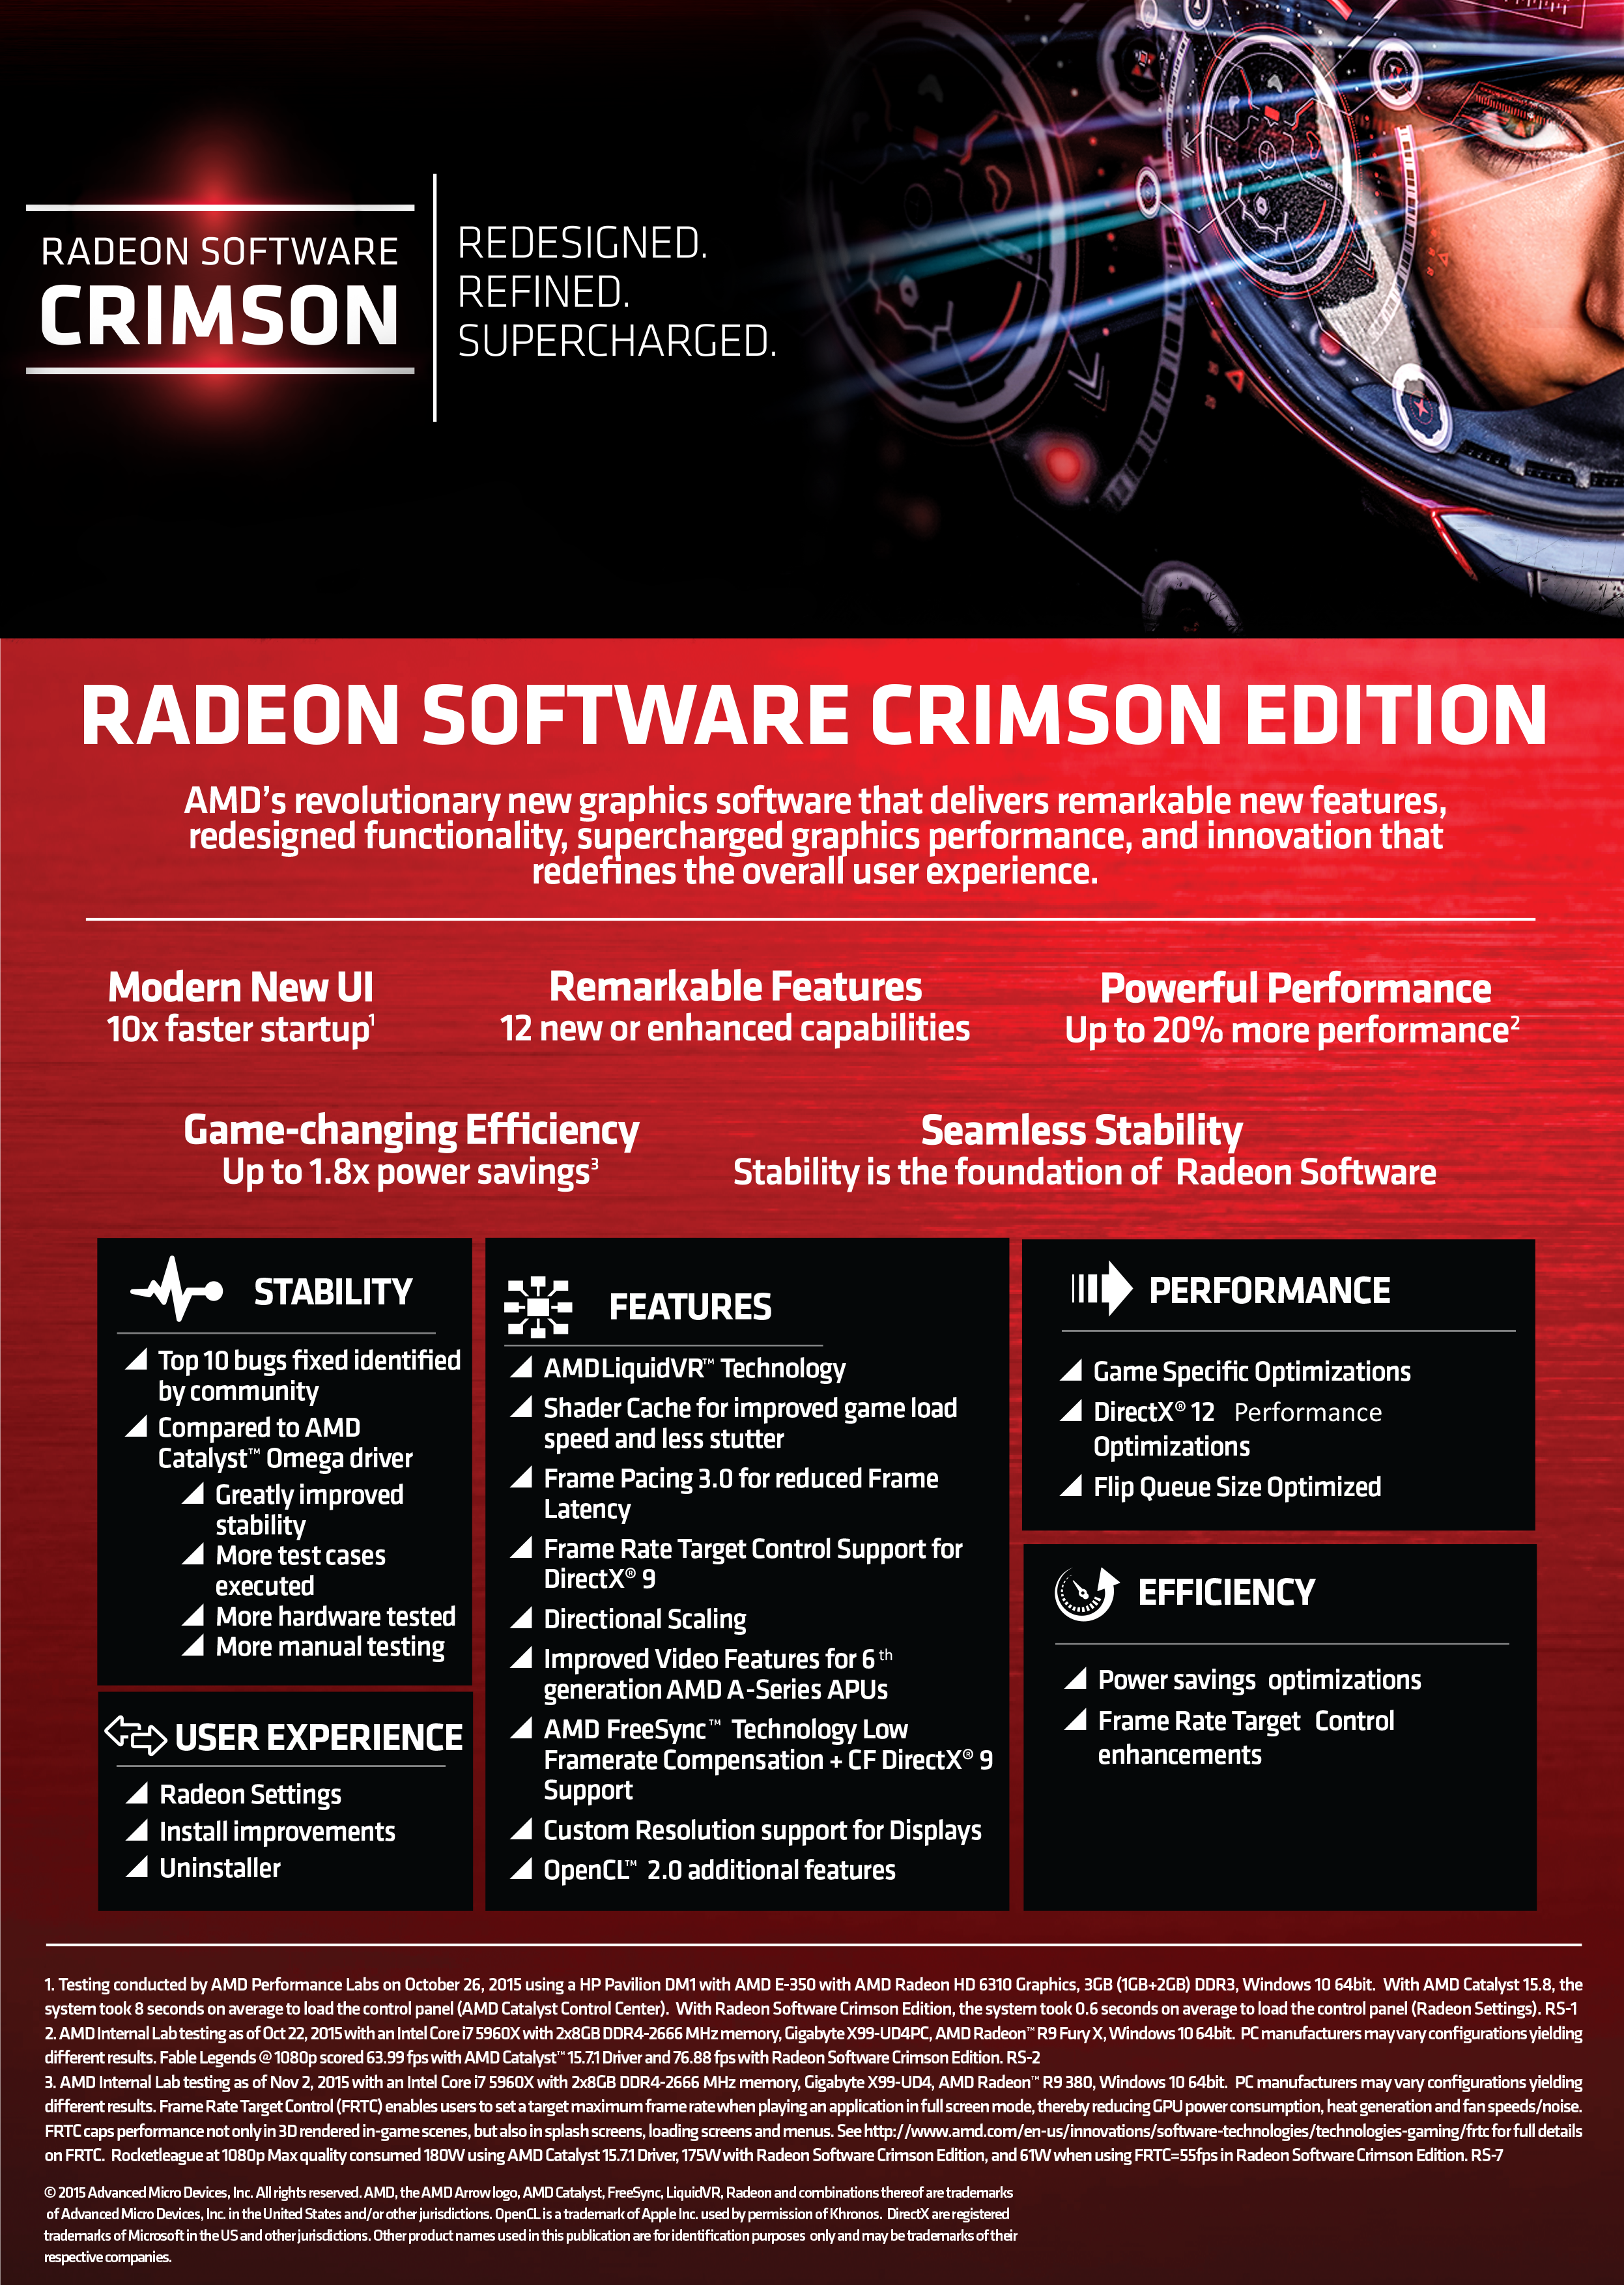 Media asset in full size related to 3dfxzone.it news item entitled as follows: AMD rilascia il nuovo driver kit Radeon Software Crimson Edition | Image Name: news23396_AMD-Radeon-Crimson-Software_1.png